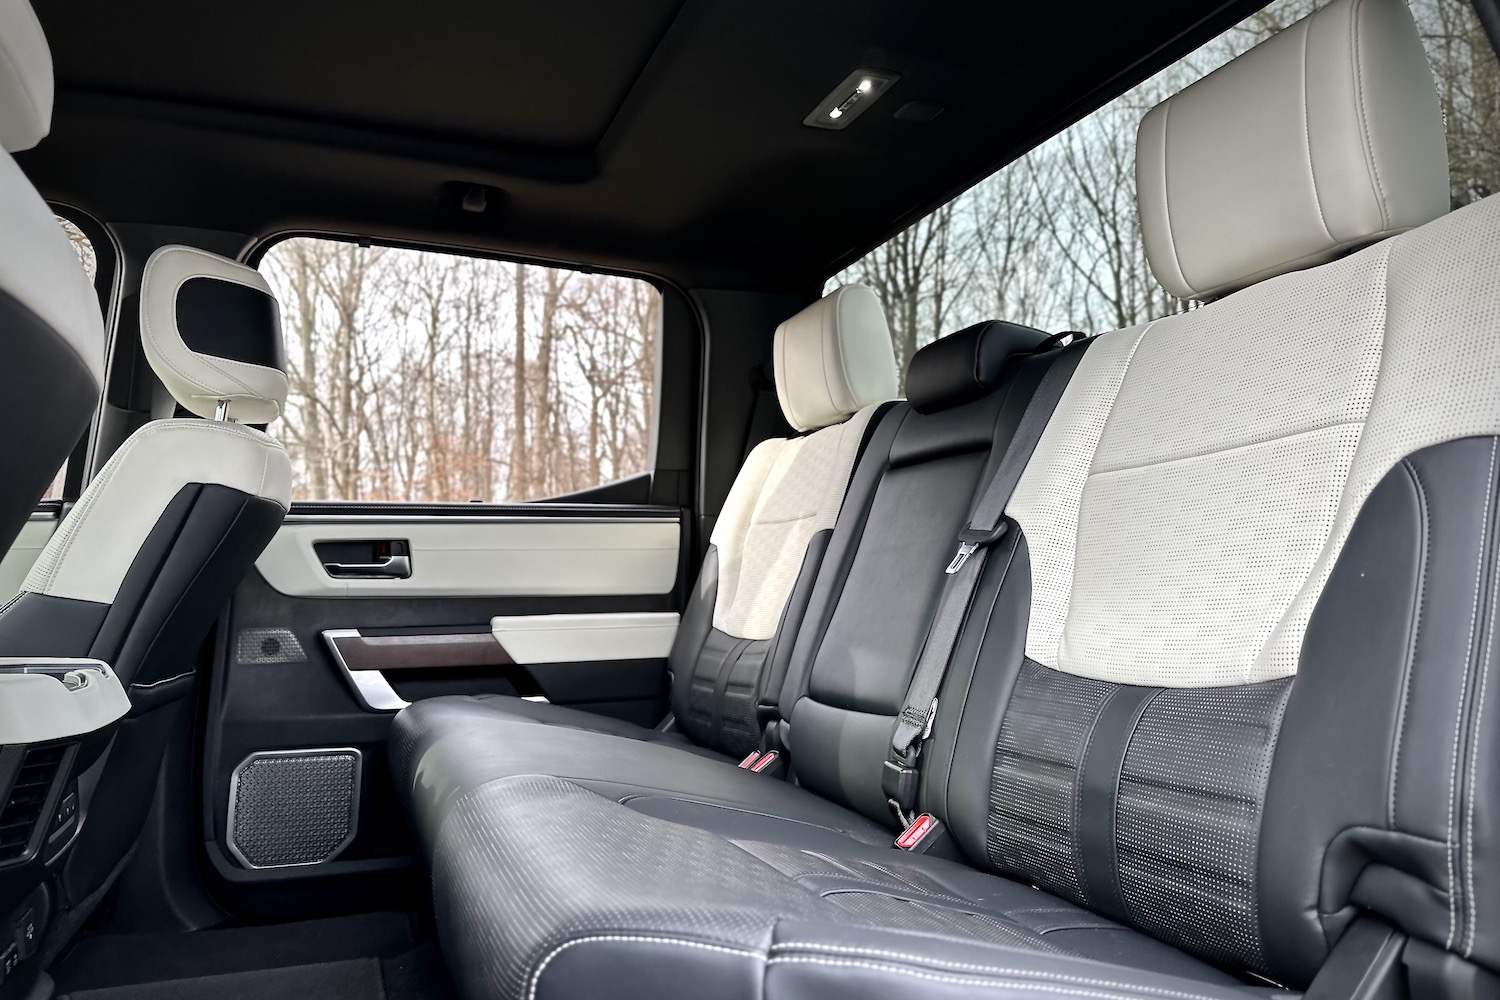 Rear seats in the 2022 Toyota Tundra Hybrid Capstone from outside the vehicle with trees in the background.